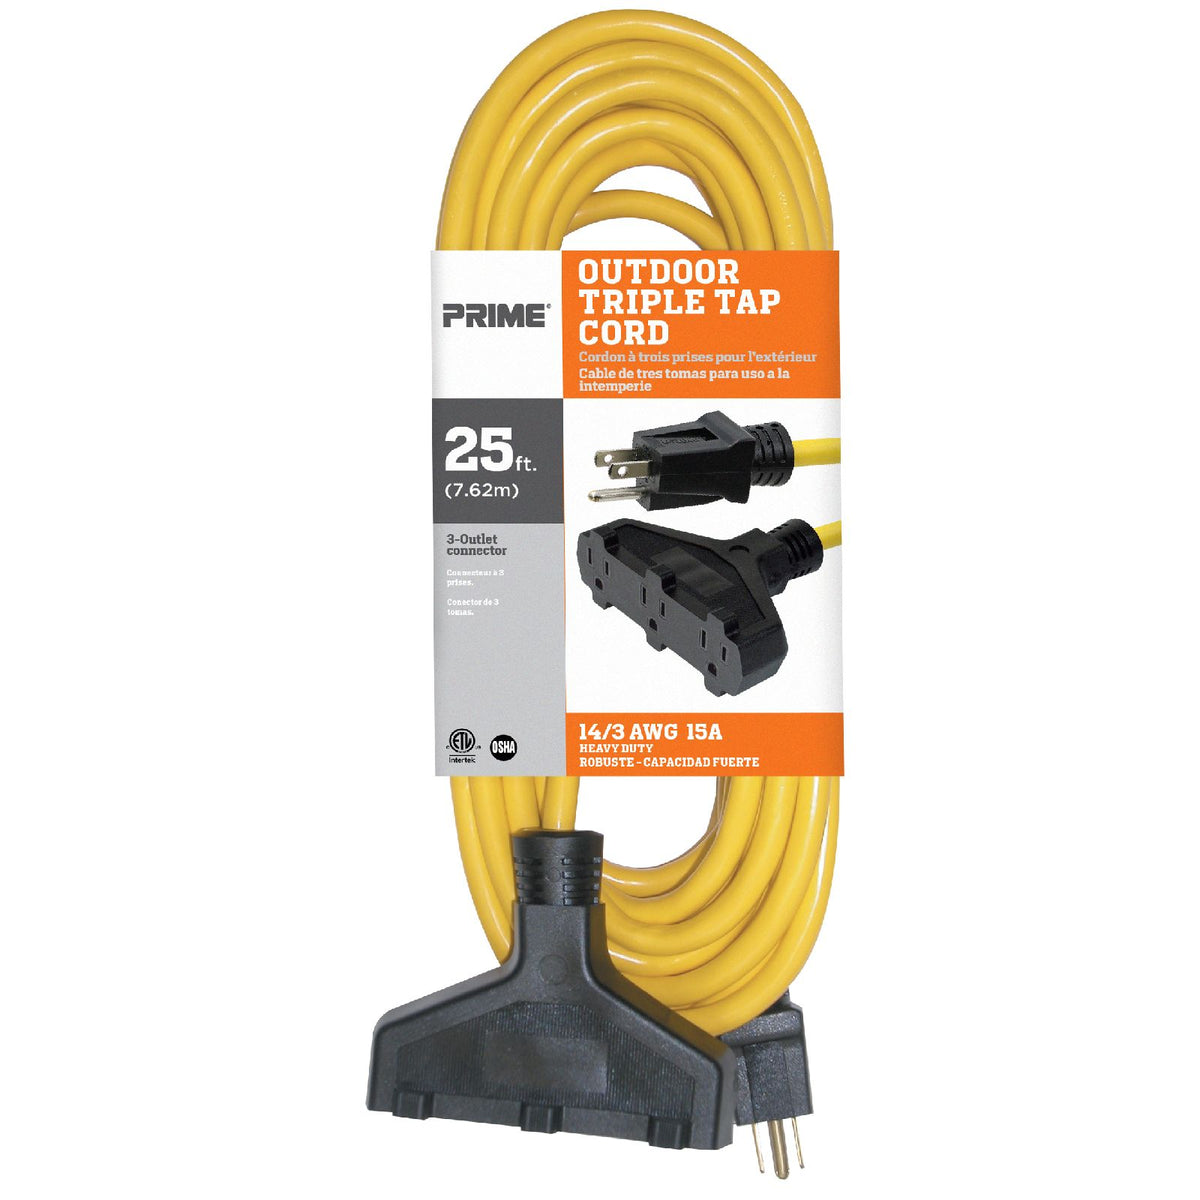 ECS Premier 25 ft Indoor and Outdoor Locking Extension Cord (E58025LOCK)